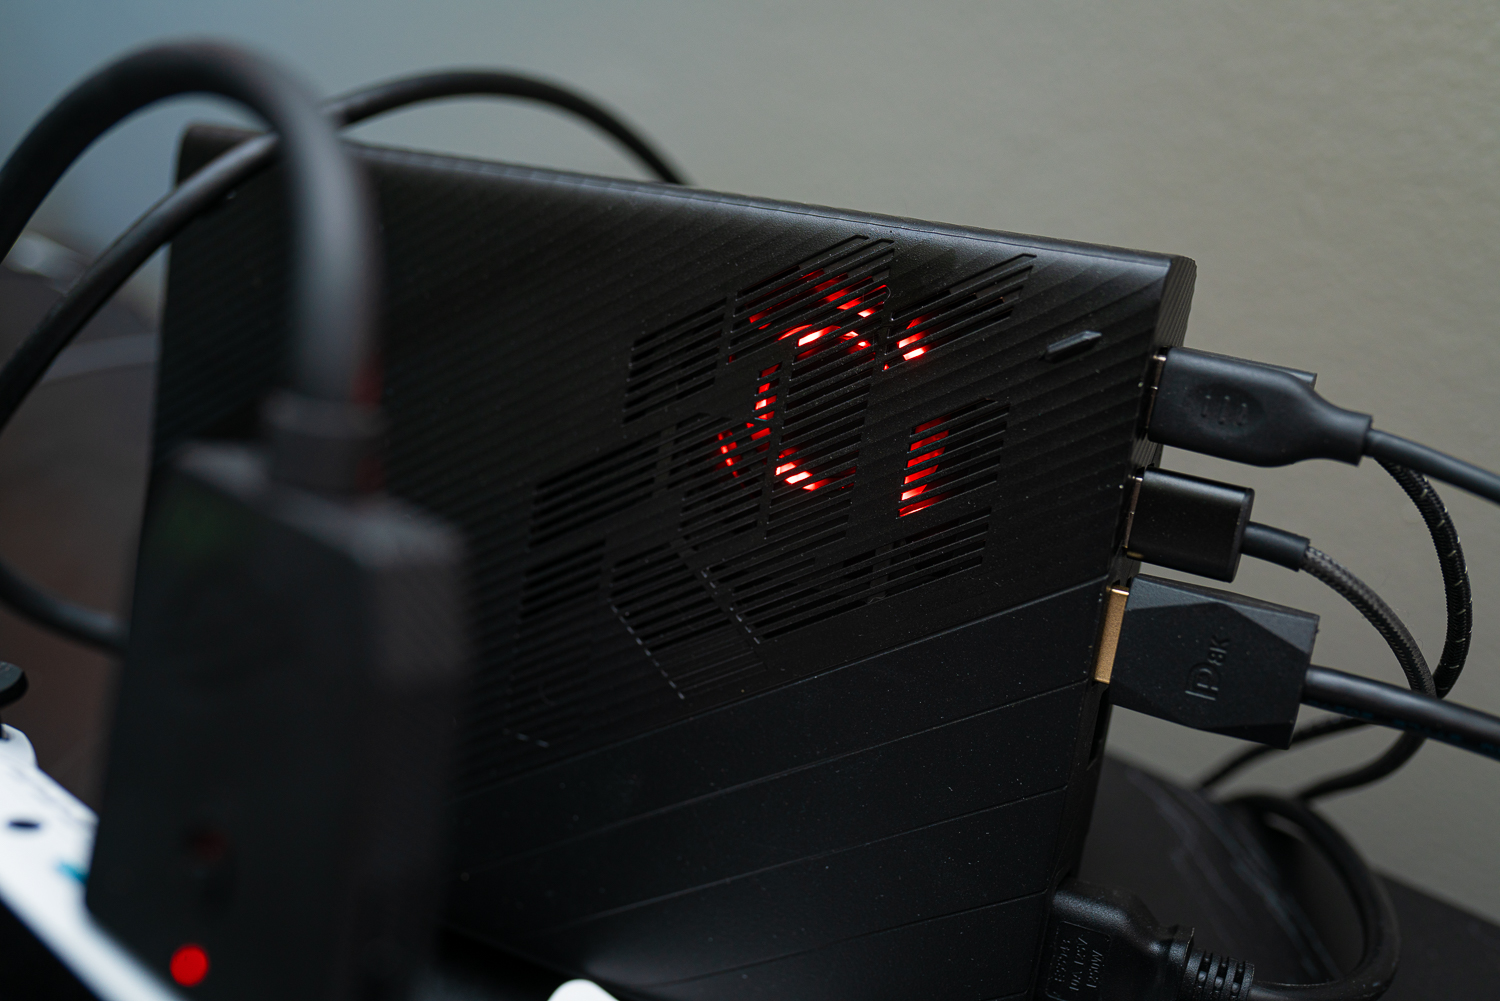 The ASUS ROG Ally Is Also A Powerful Desktop Gaming PC! Docked